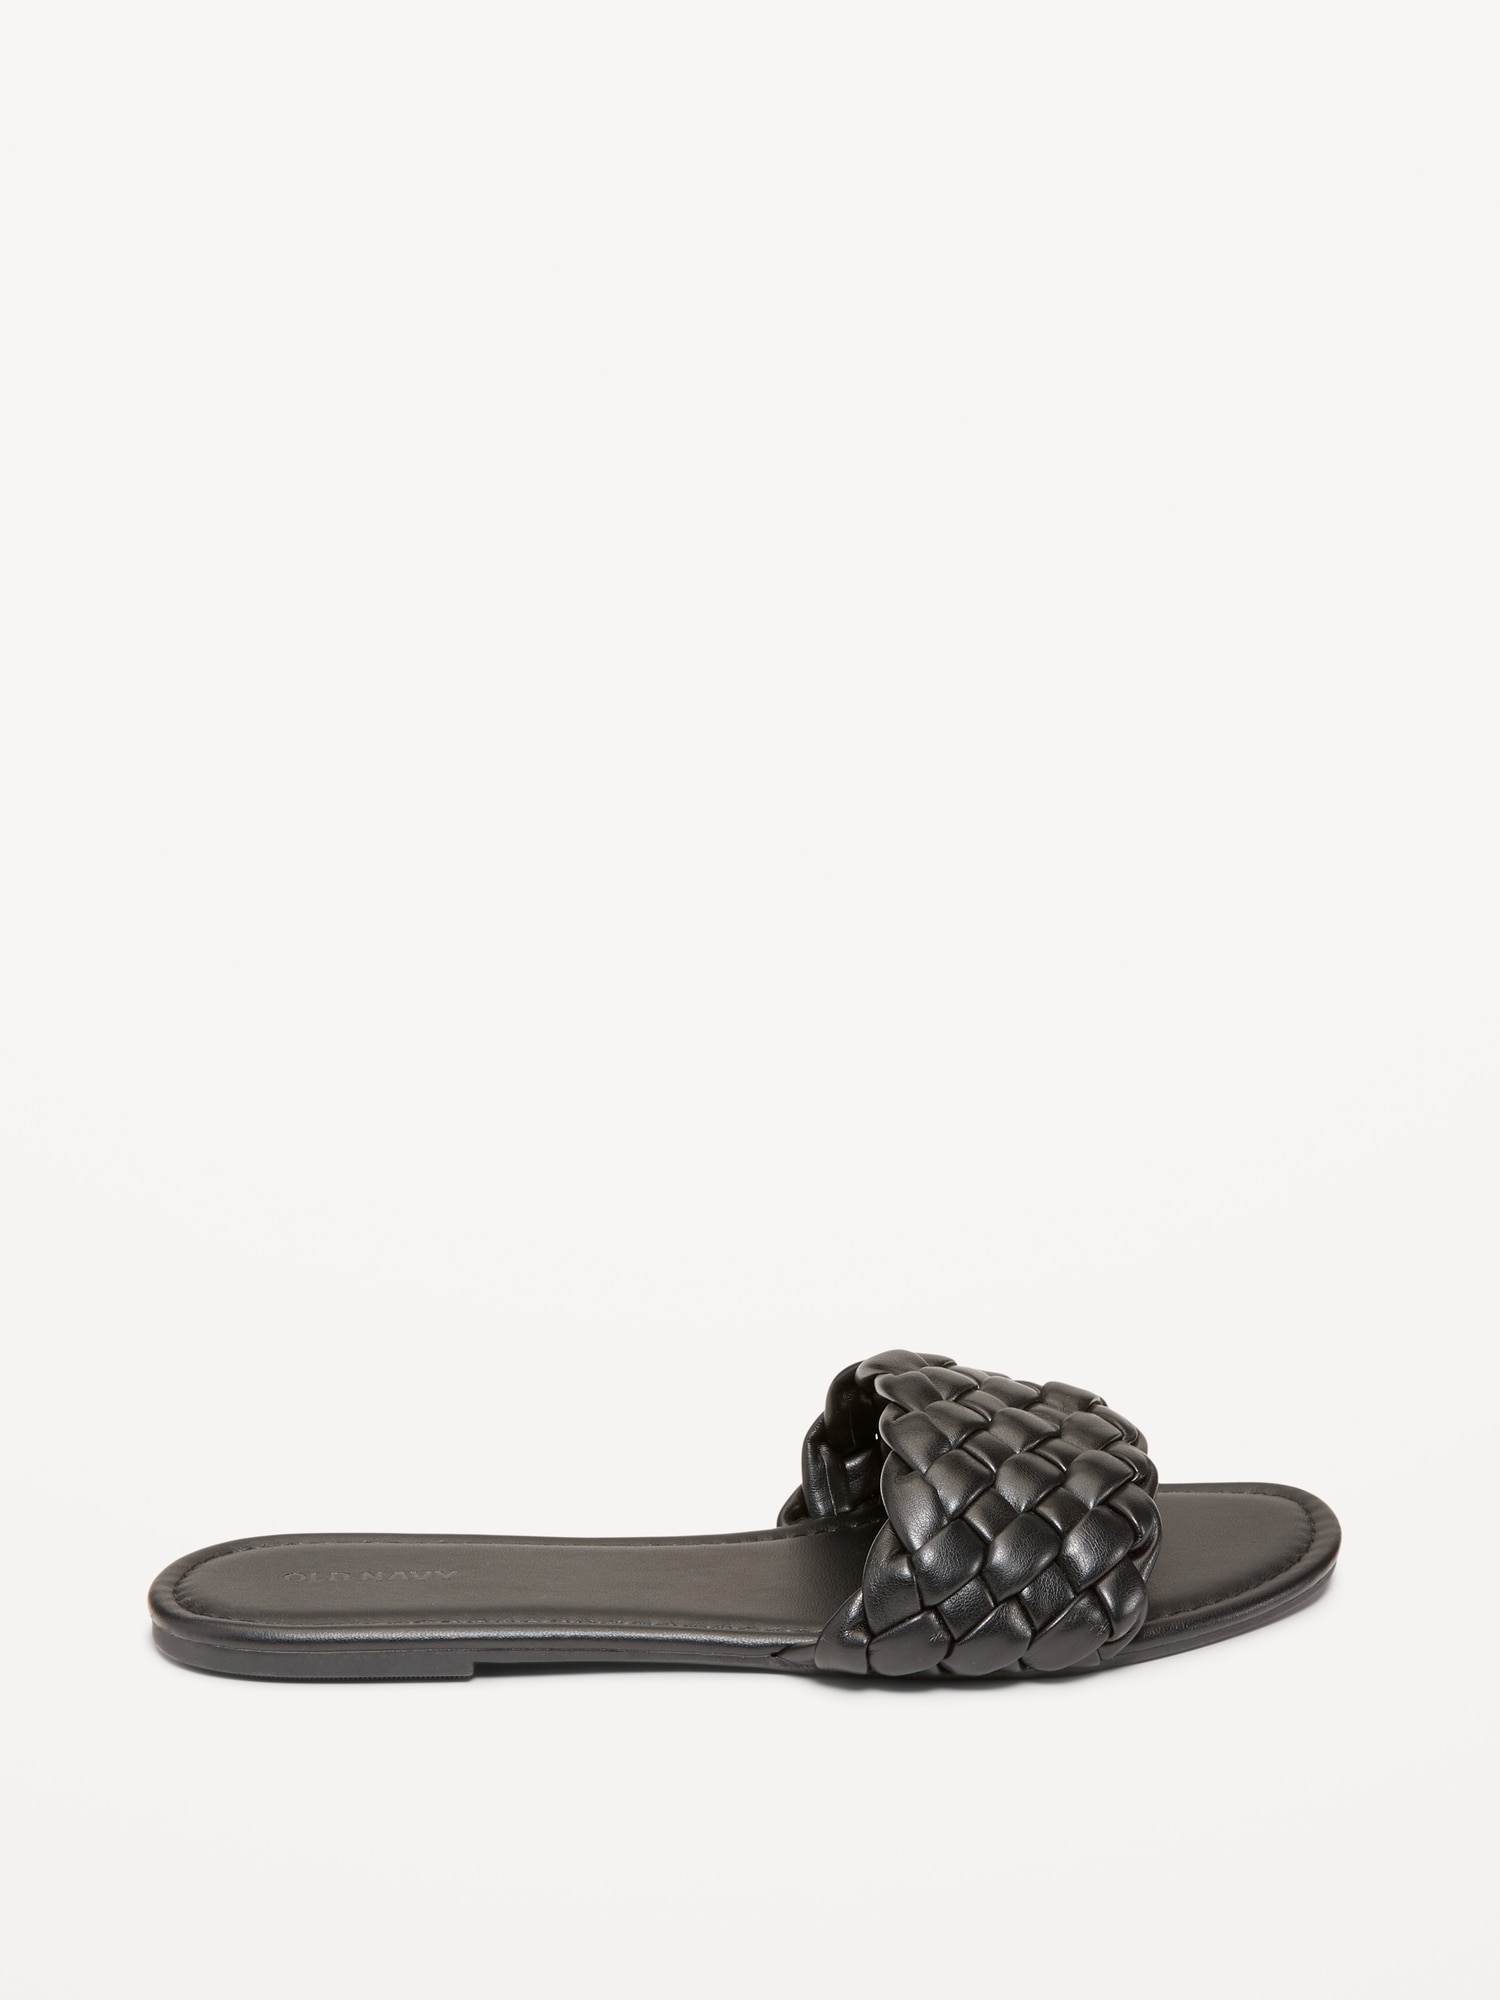 Faux-Leather Puffy Braided Sandals for Women | Old Navy